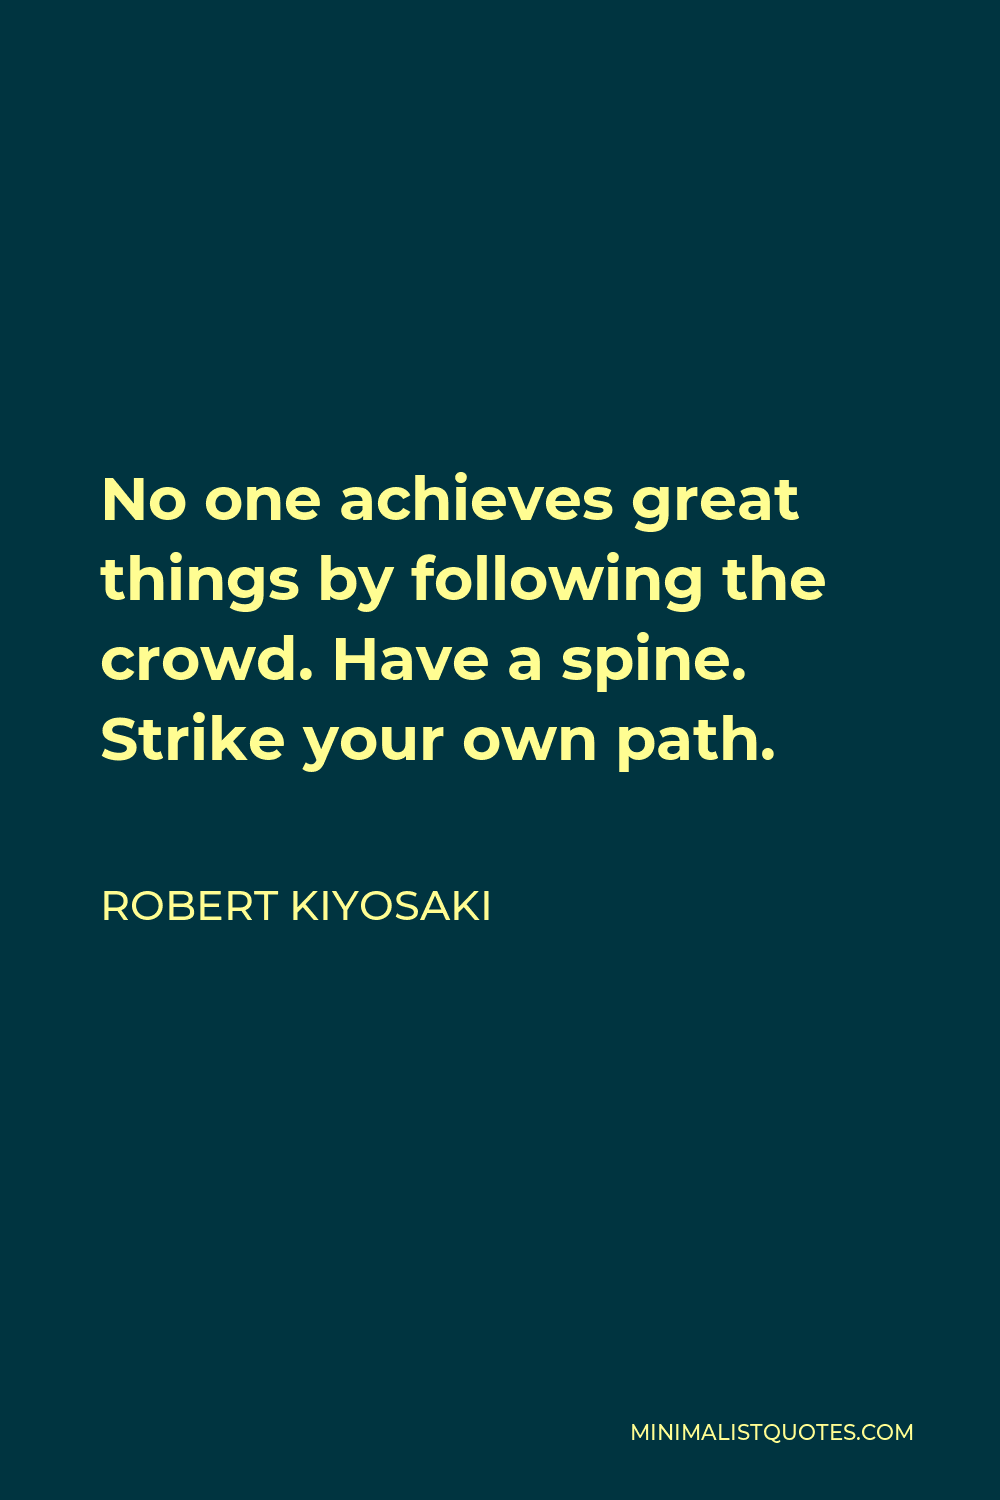 Robert Kiyosaki Quote - No one achieves great things by following the crowd. Have a spine. Strike your own path.